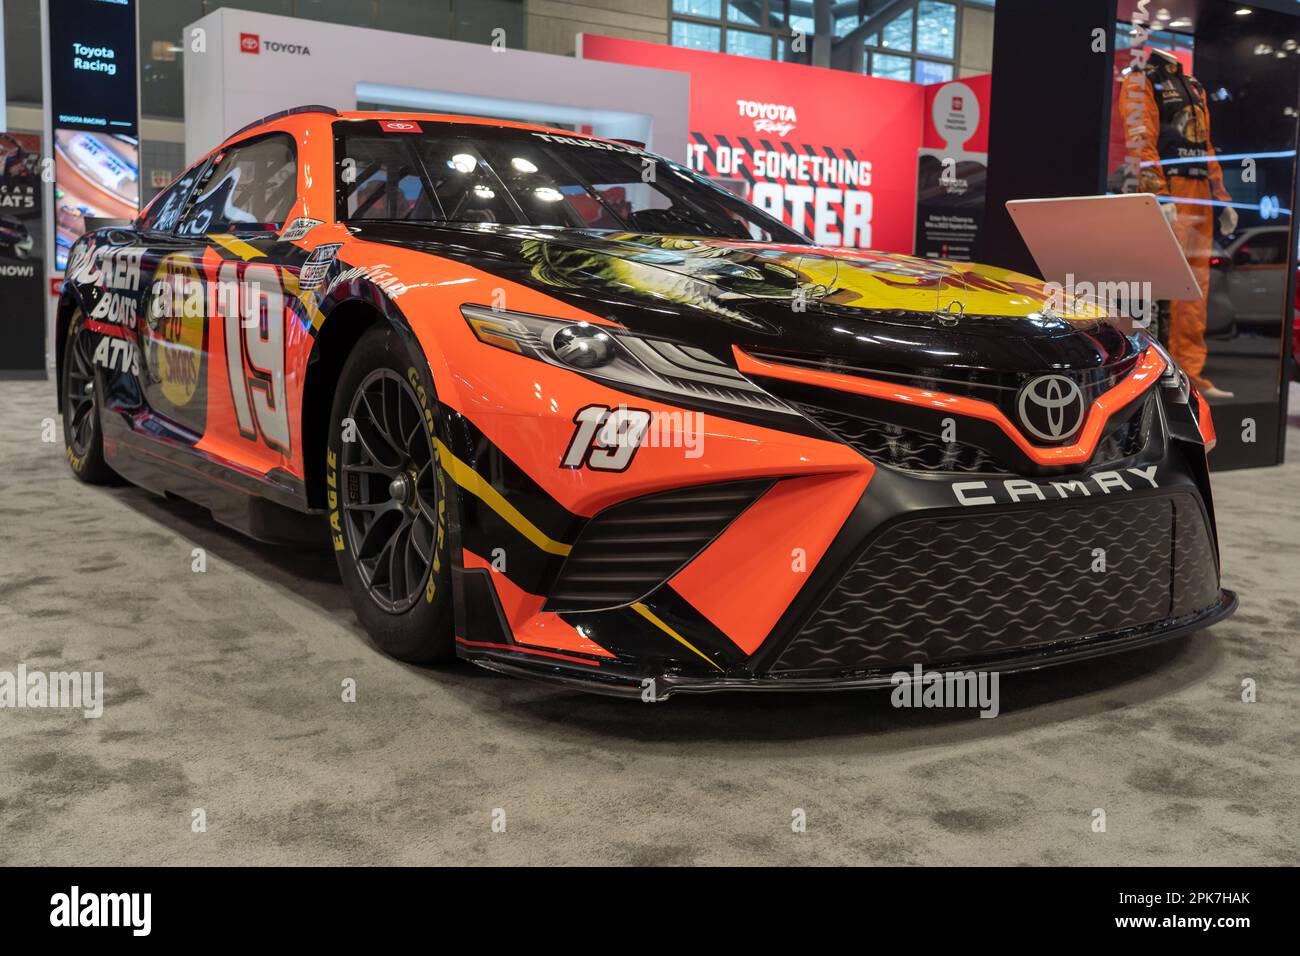 New York, United States. 05th Apr, 2023. NEW YORK, NEW YORK - APRIL 05: A Joe Gibbs Racing #19 Camry Cup Car driven by Martin Truex Jr. seen at the International Auto Show press preview at the Jacob Javits Convention Center on April 5, 2023 in New York City. (Photo by Ron Adar/SOPA Images/Sipa USA) Credit: Sipa USA/Alamy Live News Stock Photo